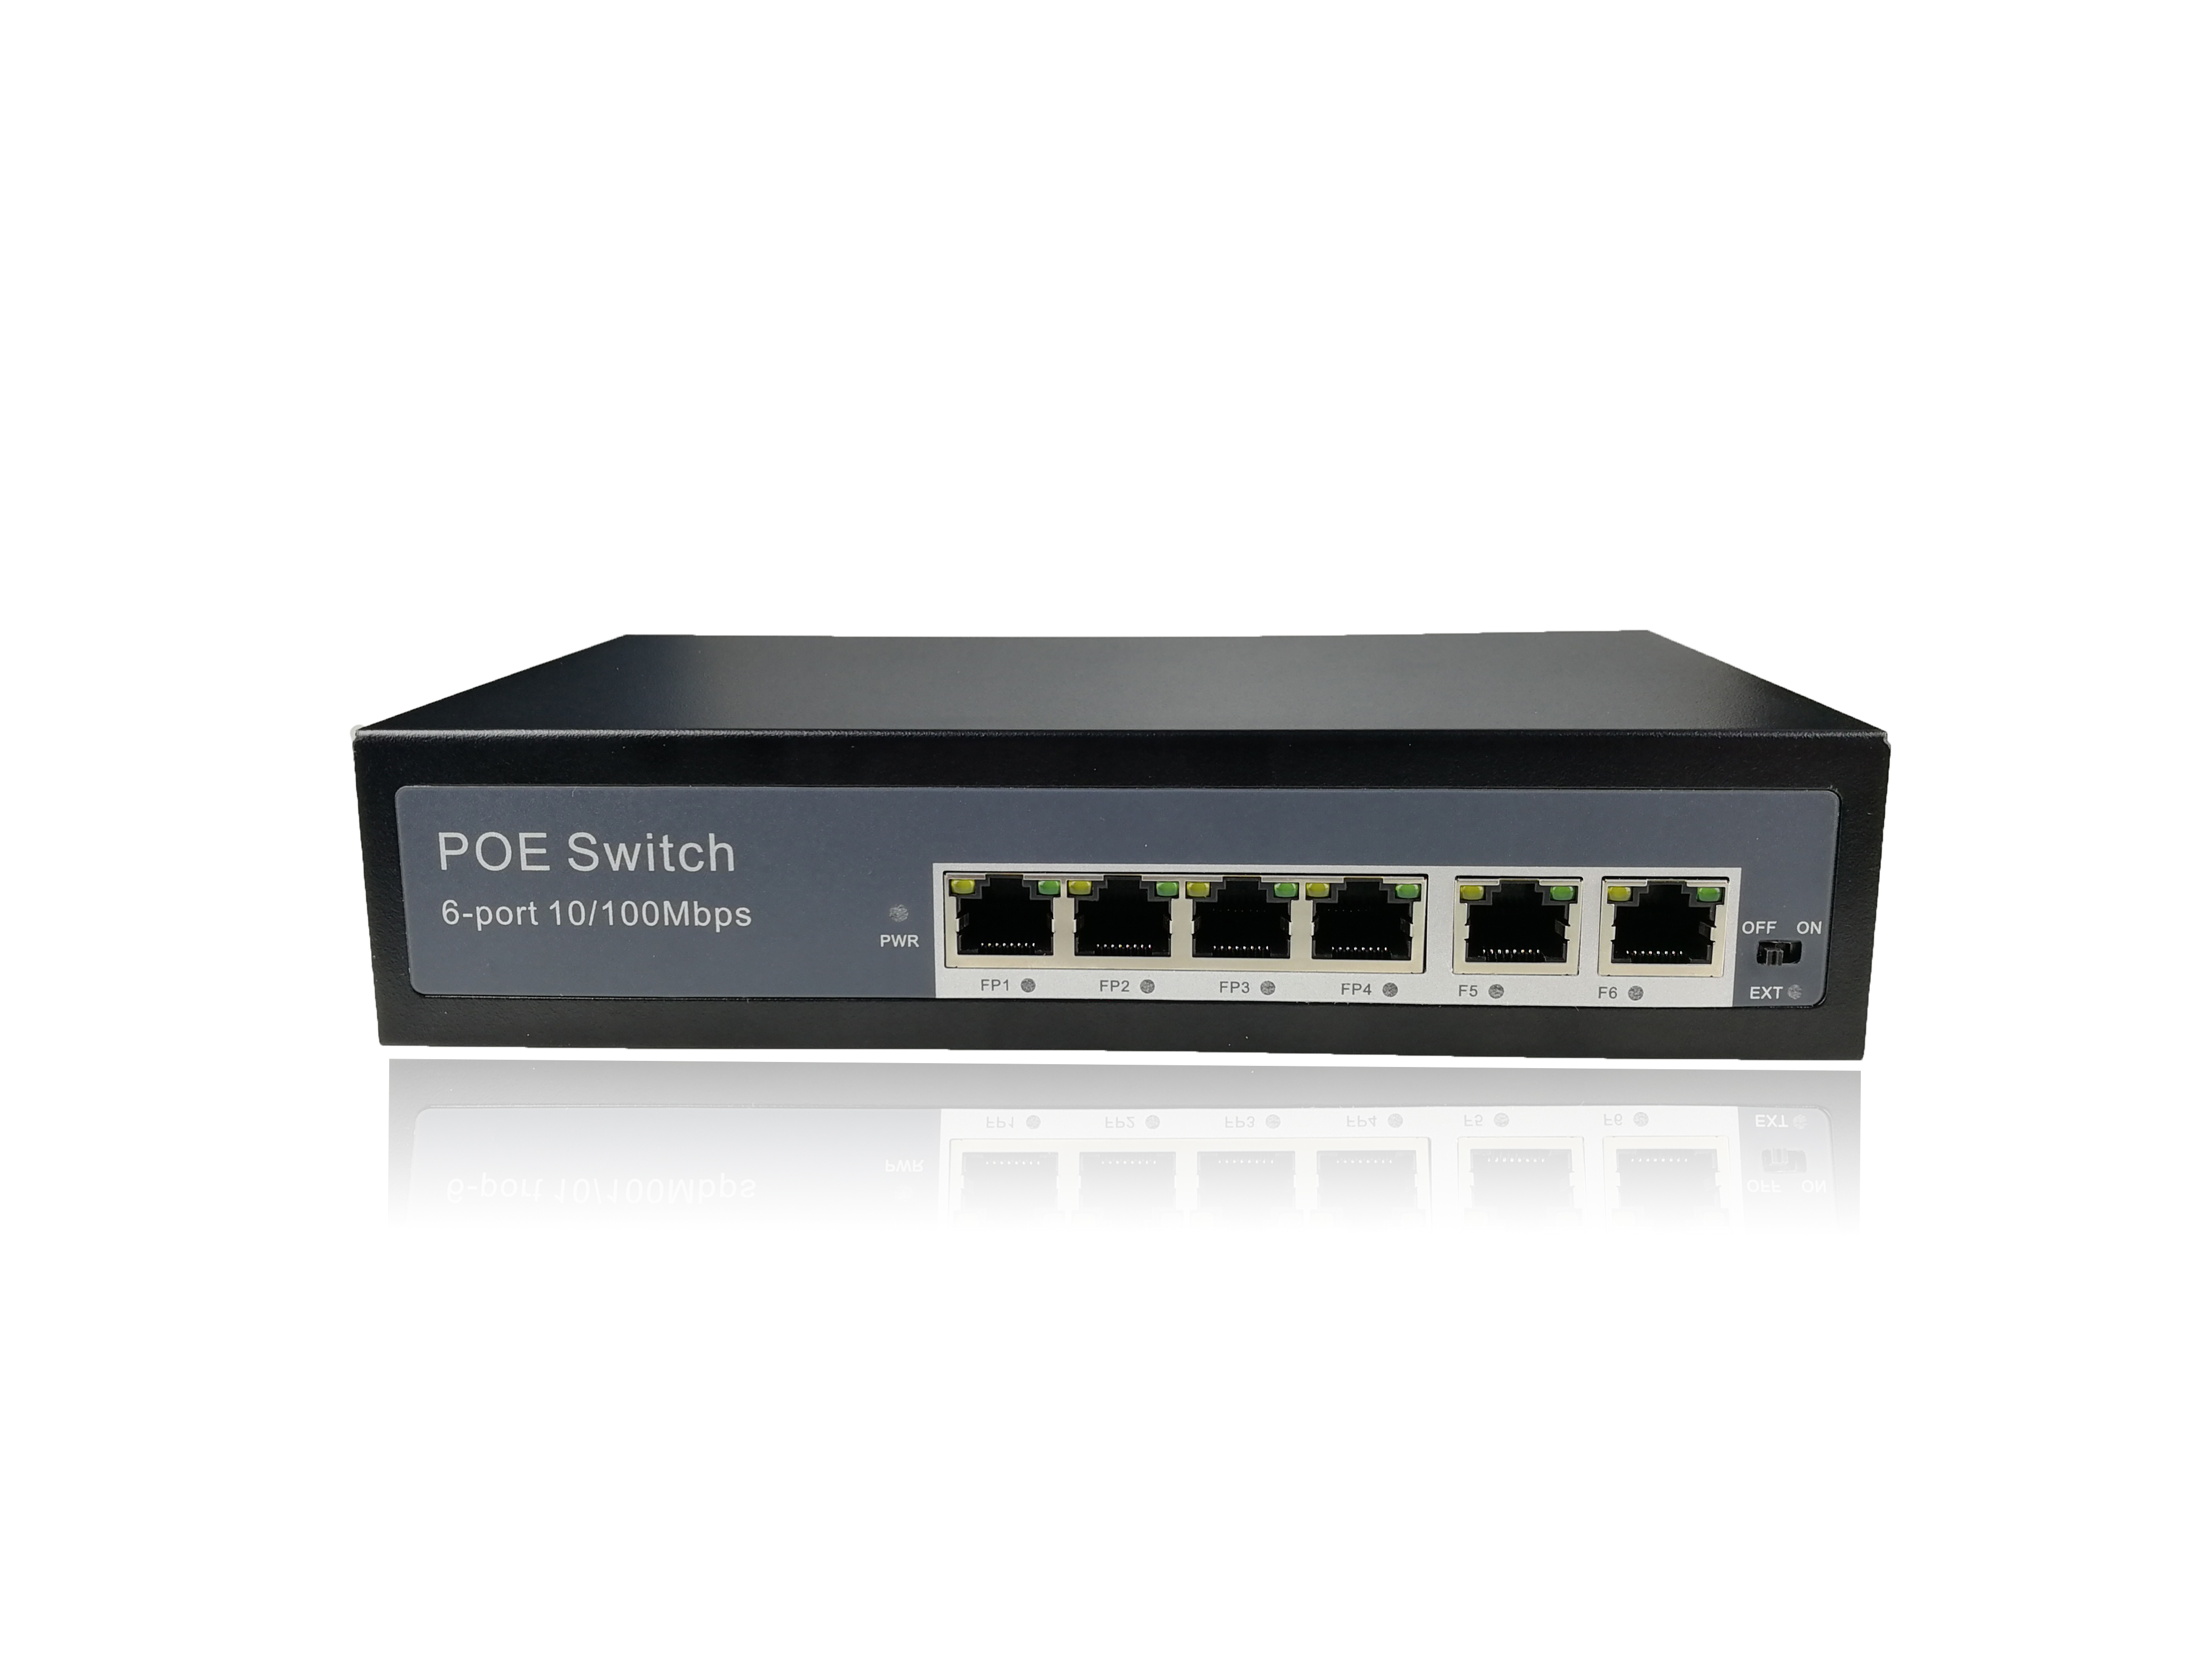 6 10/100Mbps auto-adaptive RJ45 ports 1~4 ports support IEEE 802.3af/at standard